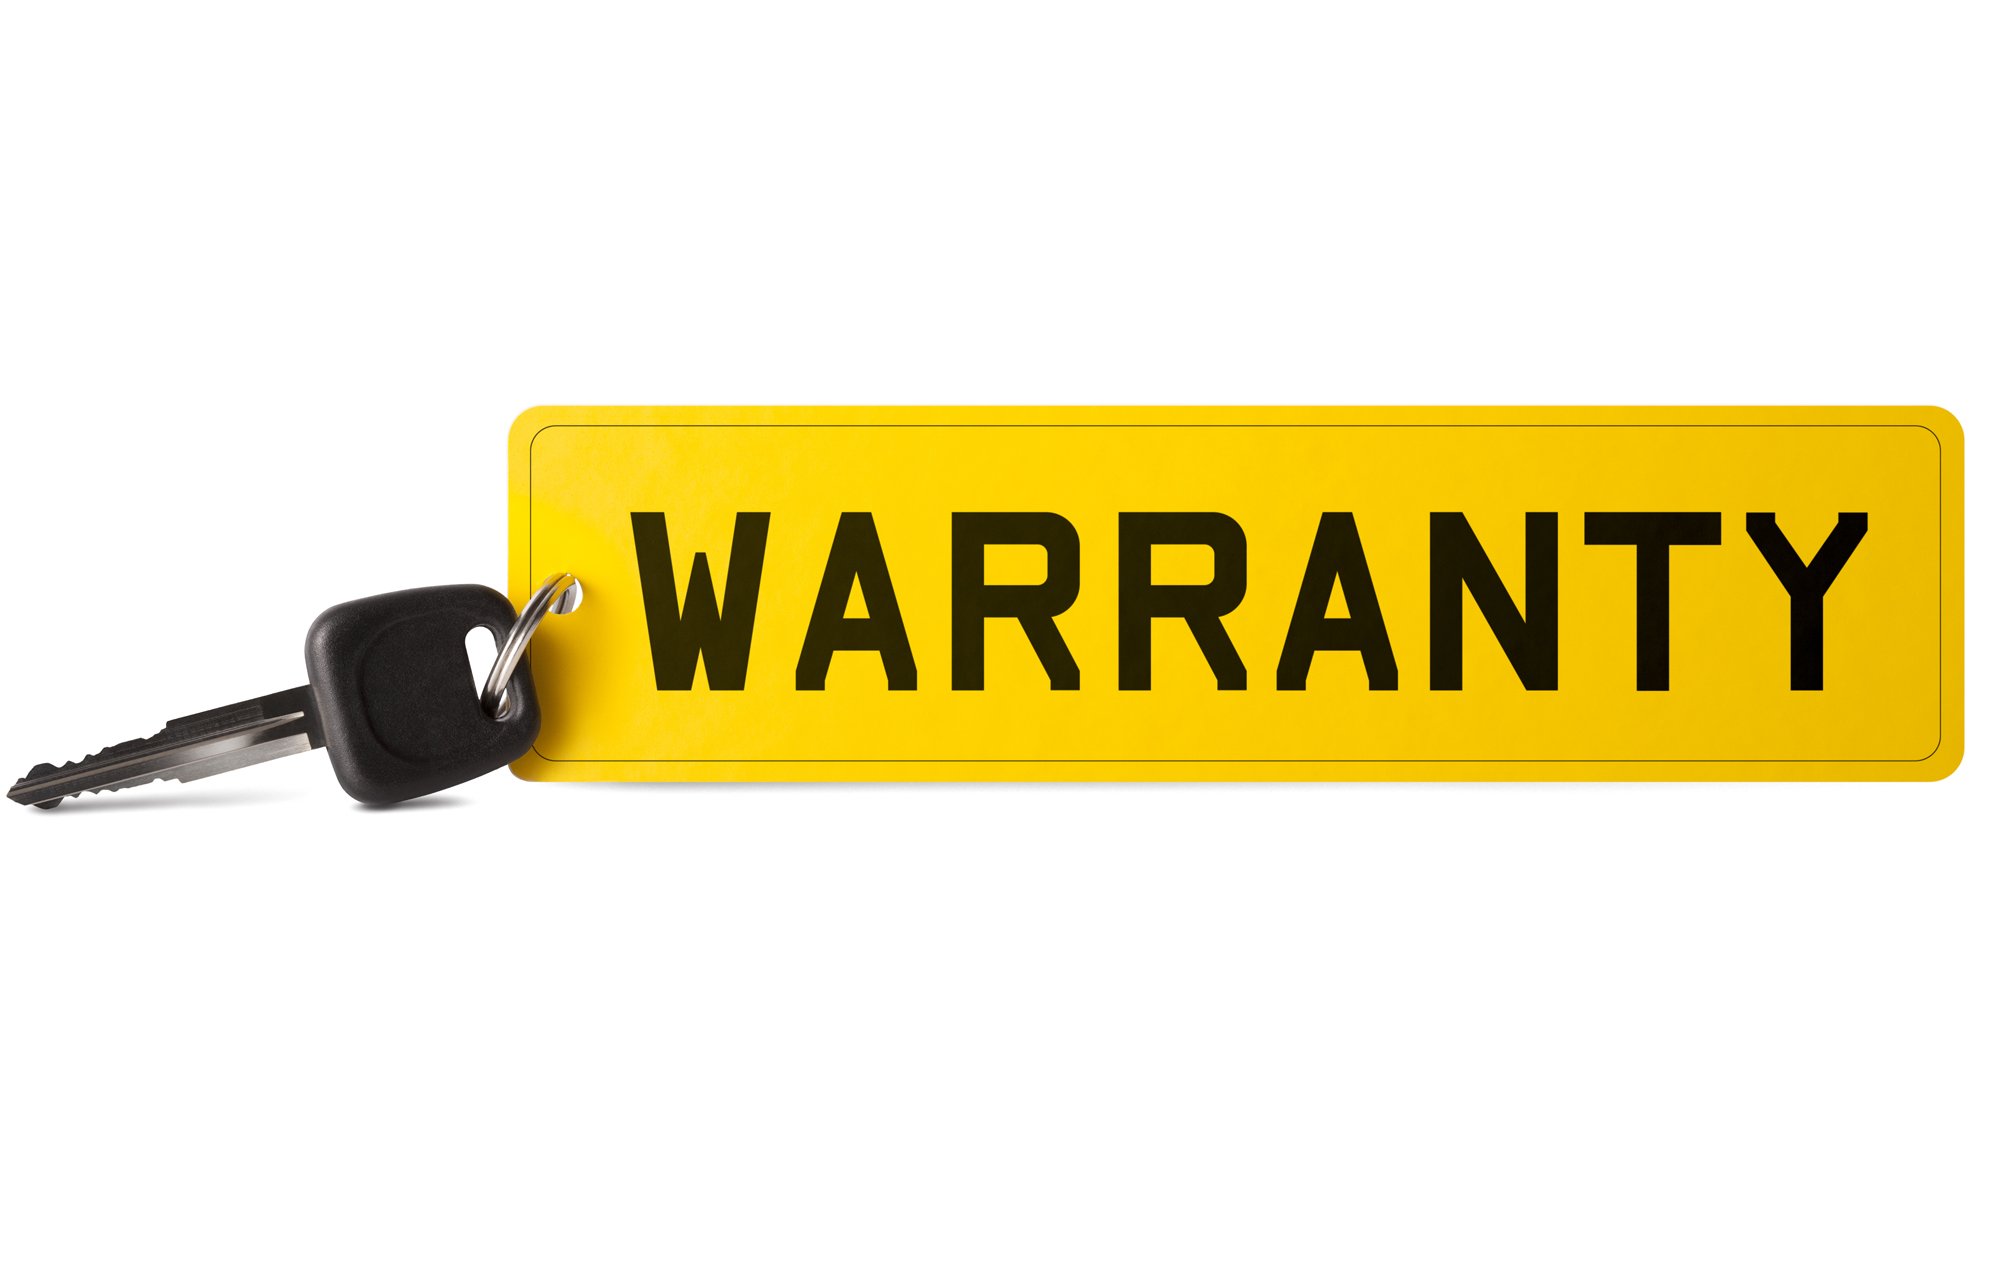 What is a Car Warranty